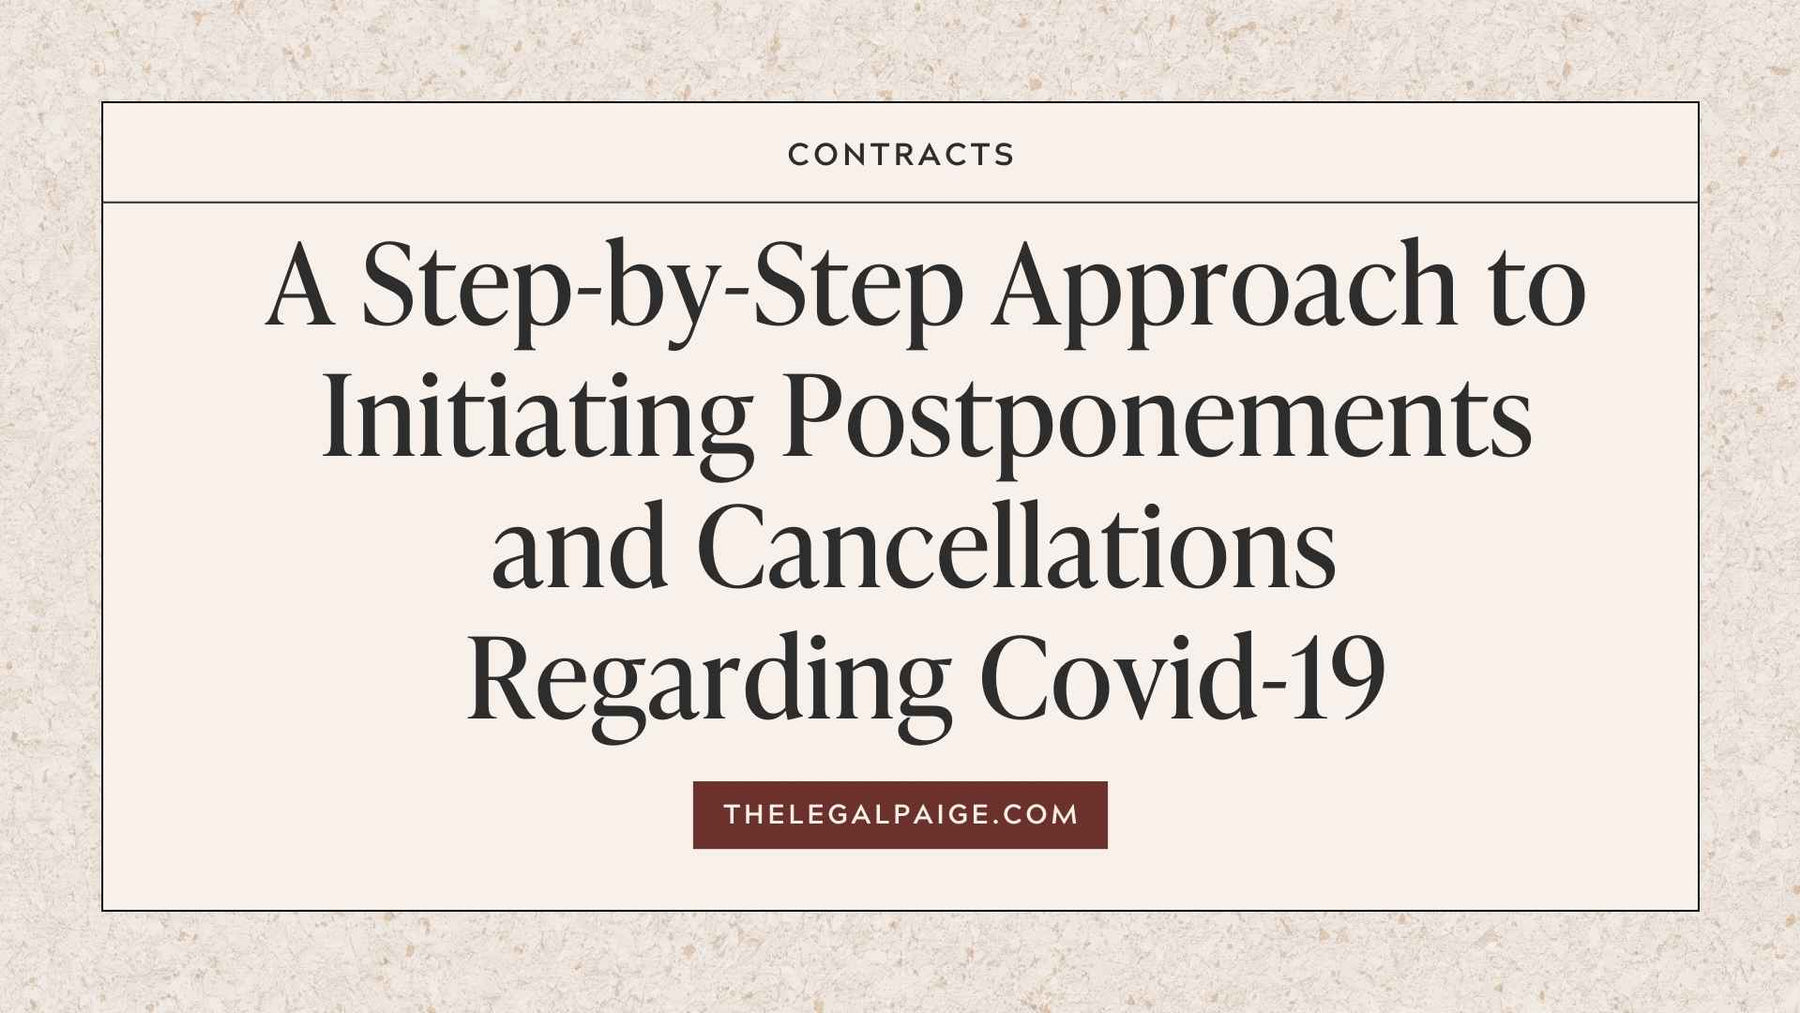 The Legal Paige - A Step-by-Step Approach to Postponements + Cancellations Regarding COVID-19